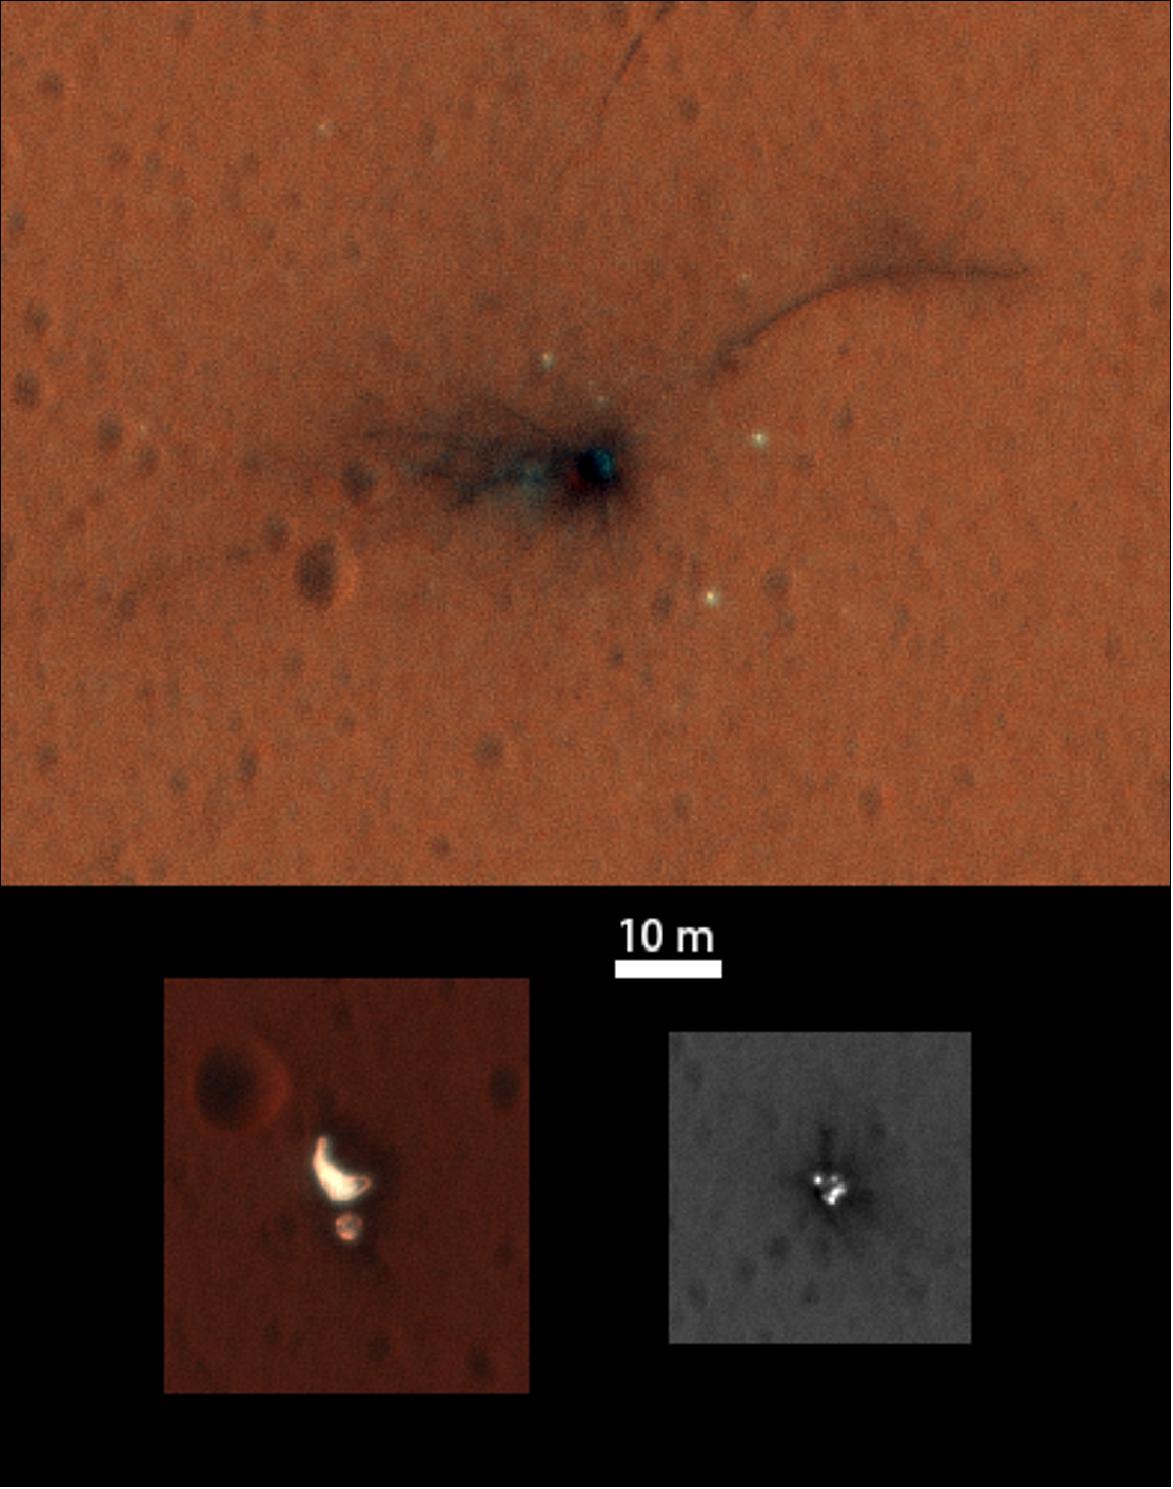 Figure 102: Composite of the ExoMars Schiaparelli module elements seen by NASA’s MRO (Mars Reconnaissance Orbiter) HiRISE (High Resolution Imaging Science Experiment) on 1 November 2016. Both the main impact site (top) and the region with the parachute and rear heatshield (bottom left) are now captured in the central portion of the HiRISE imaging swath that is imaged through three different filters, enabling a color image to be constructed. The front heatshield (bottom right) lies outside the central color imaging swath (image credit: NASA/JPL-Caltech/University of Arizona) 91)